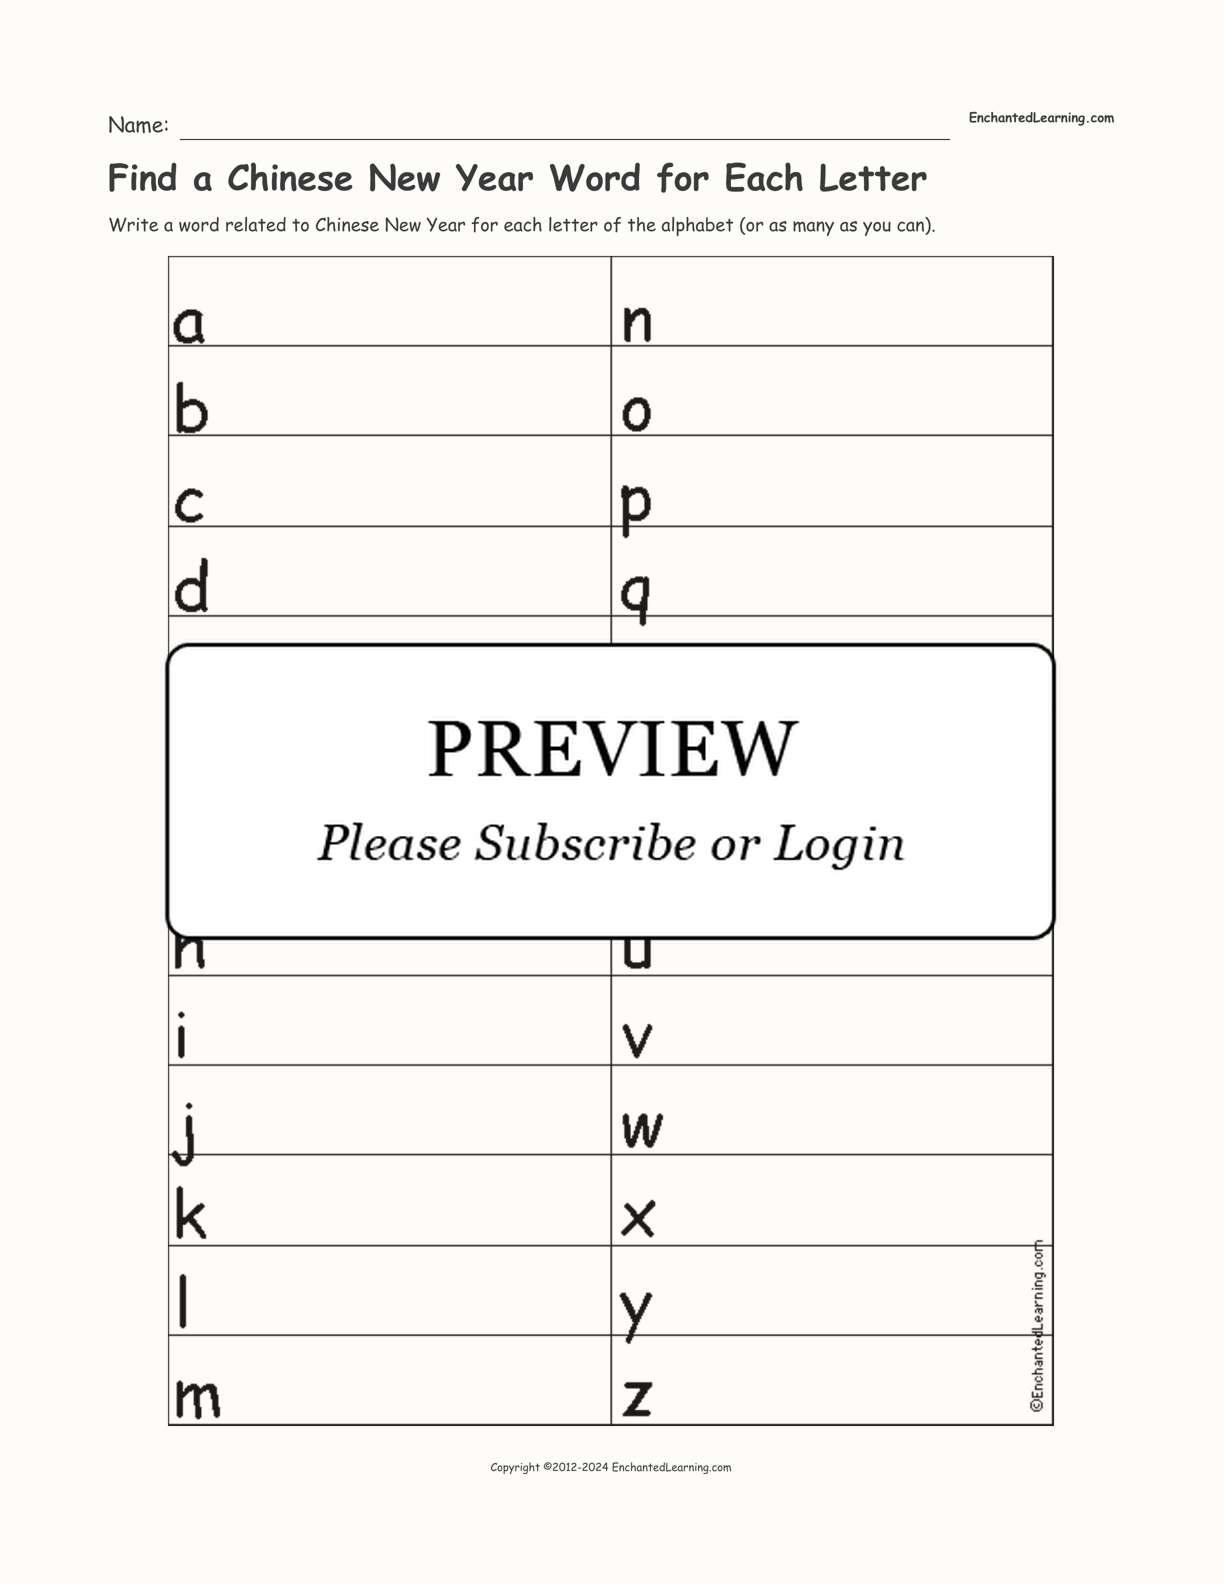 Find a Chinese New Year Word for Each Letter interactive worksheet page 1